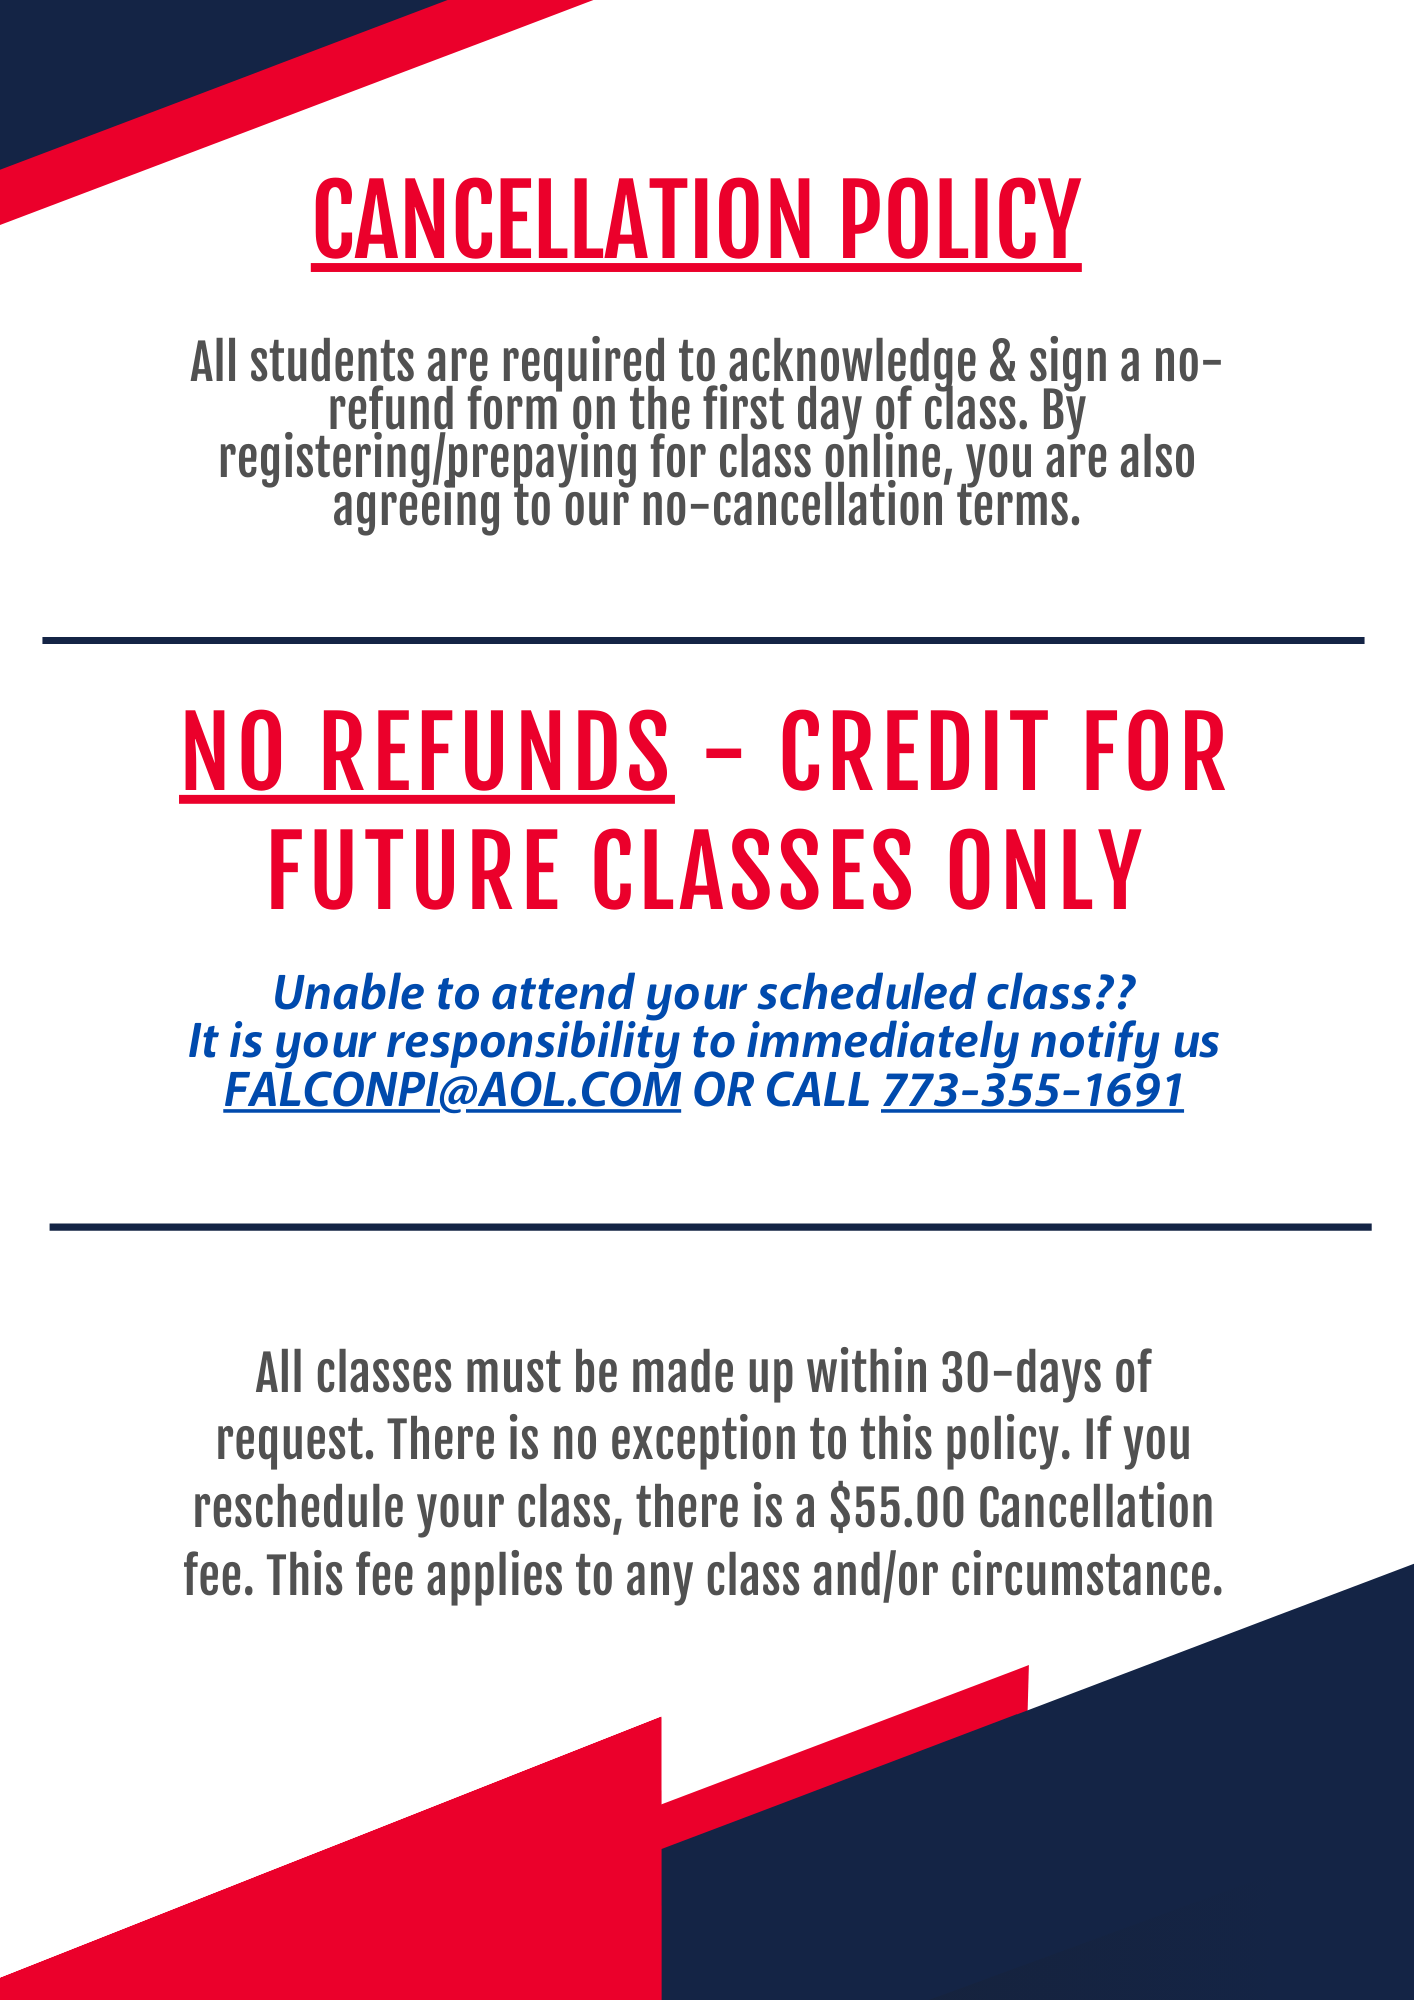 an advertisement for a cancellation policy that says no refunds - credit for future classes only